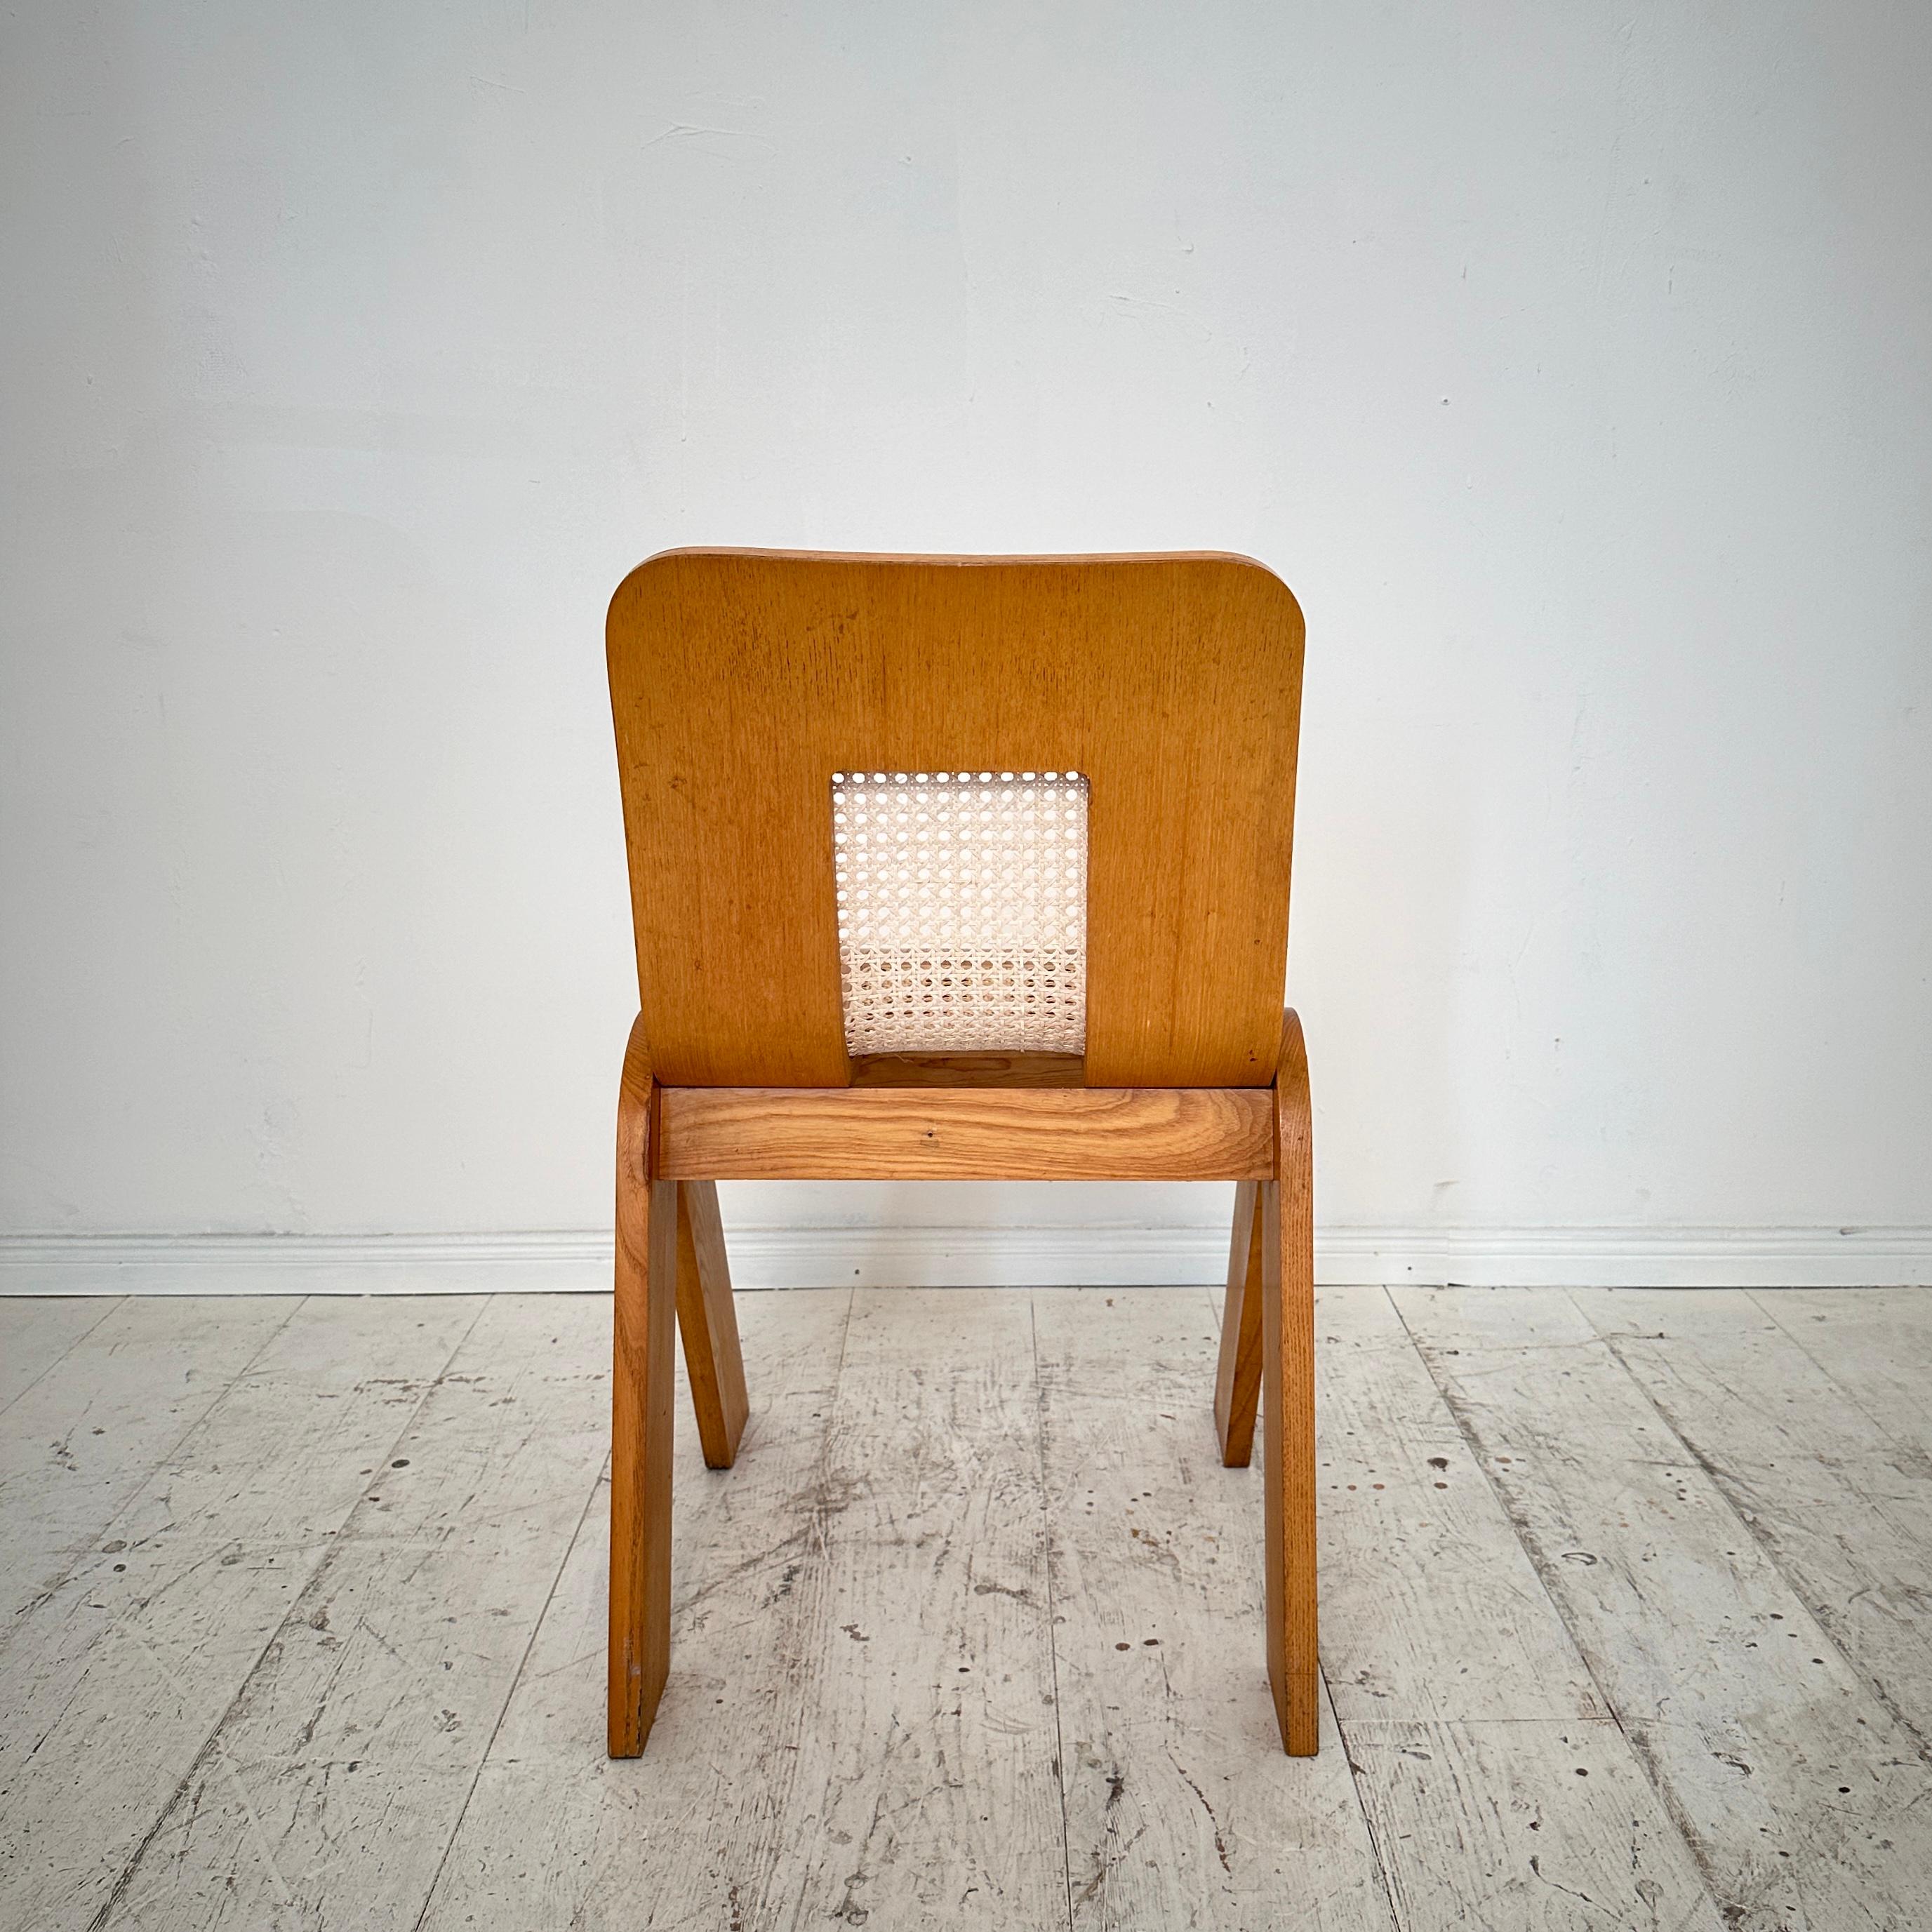 Cane 1 of 3 Mid Century Italian Ash Dining Chairs by Gigi Sabadin for Stilwood, 1970s For Sale